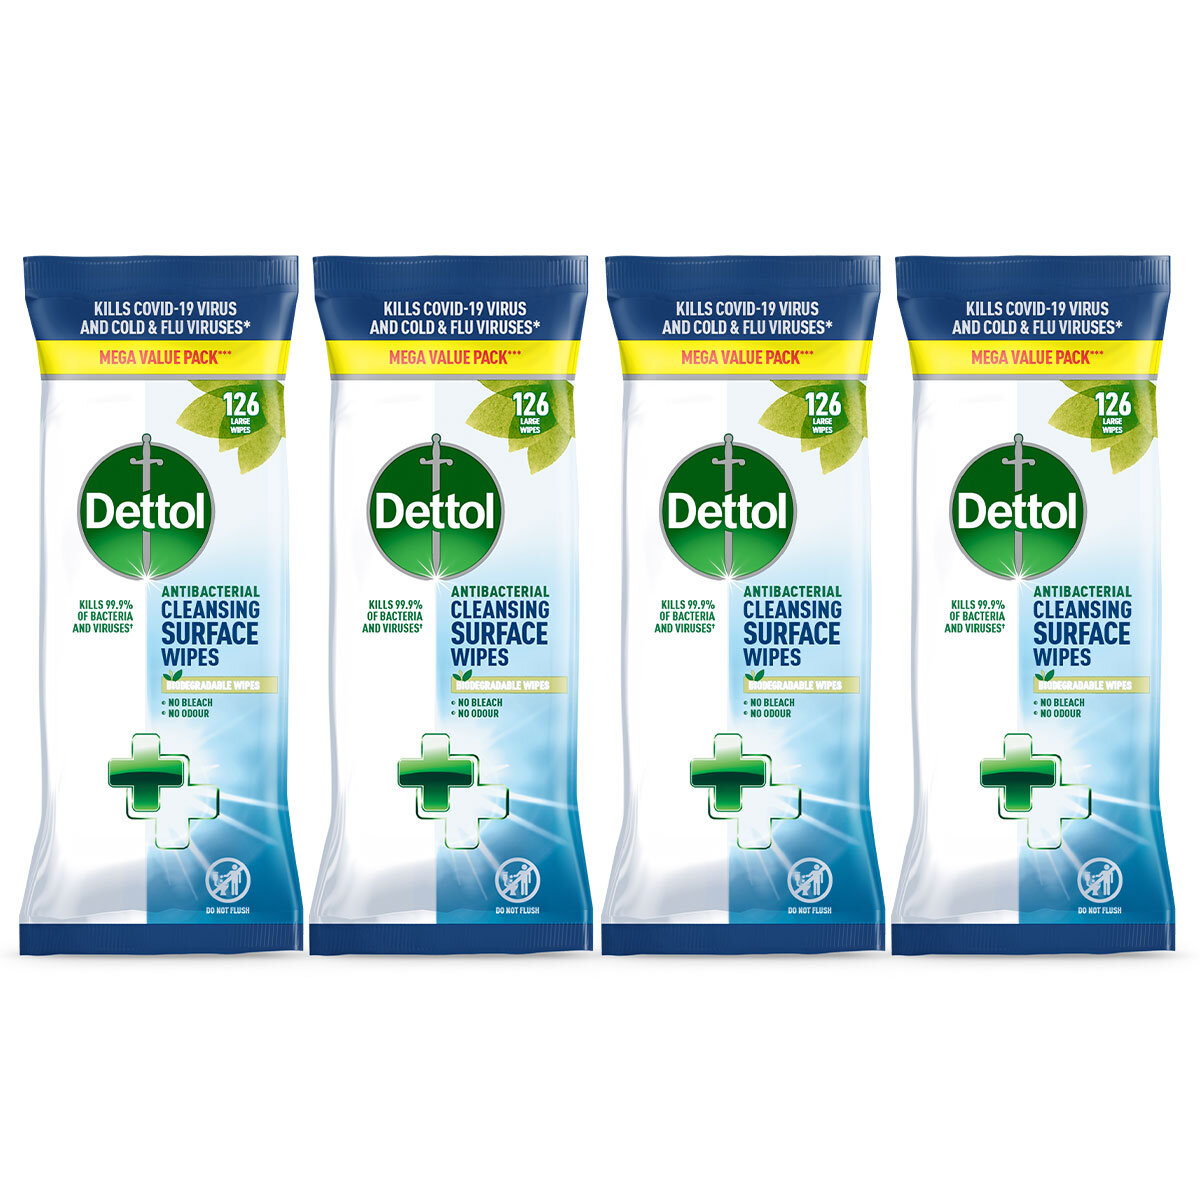 Cut out image of Dettol wipes on white background pack of 4